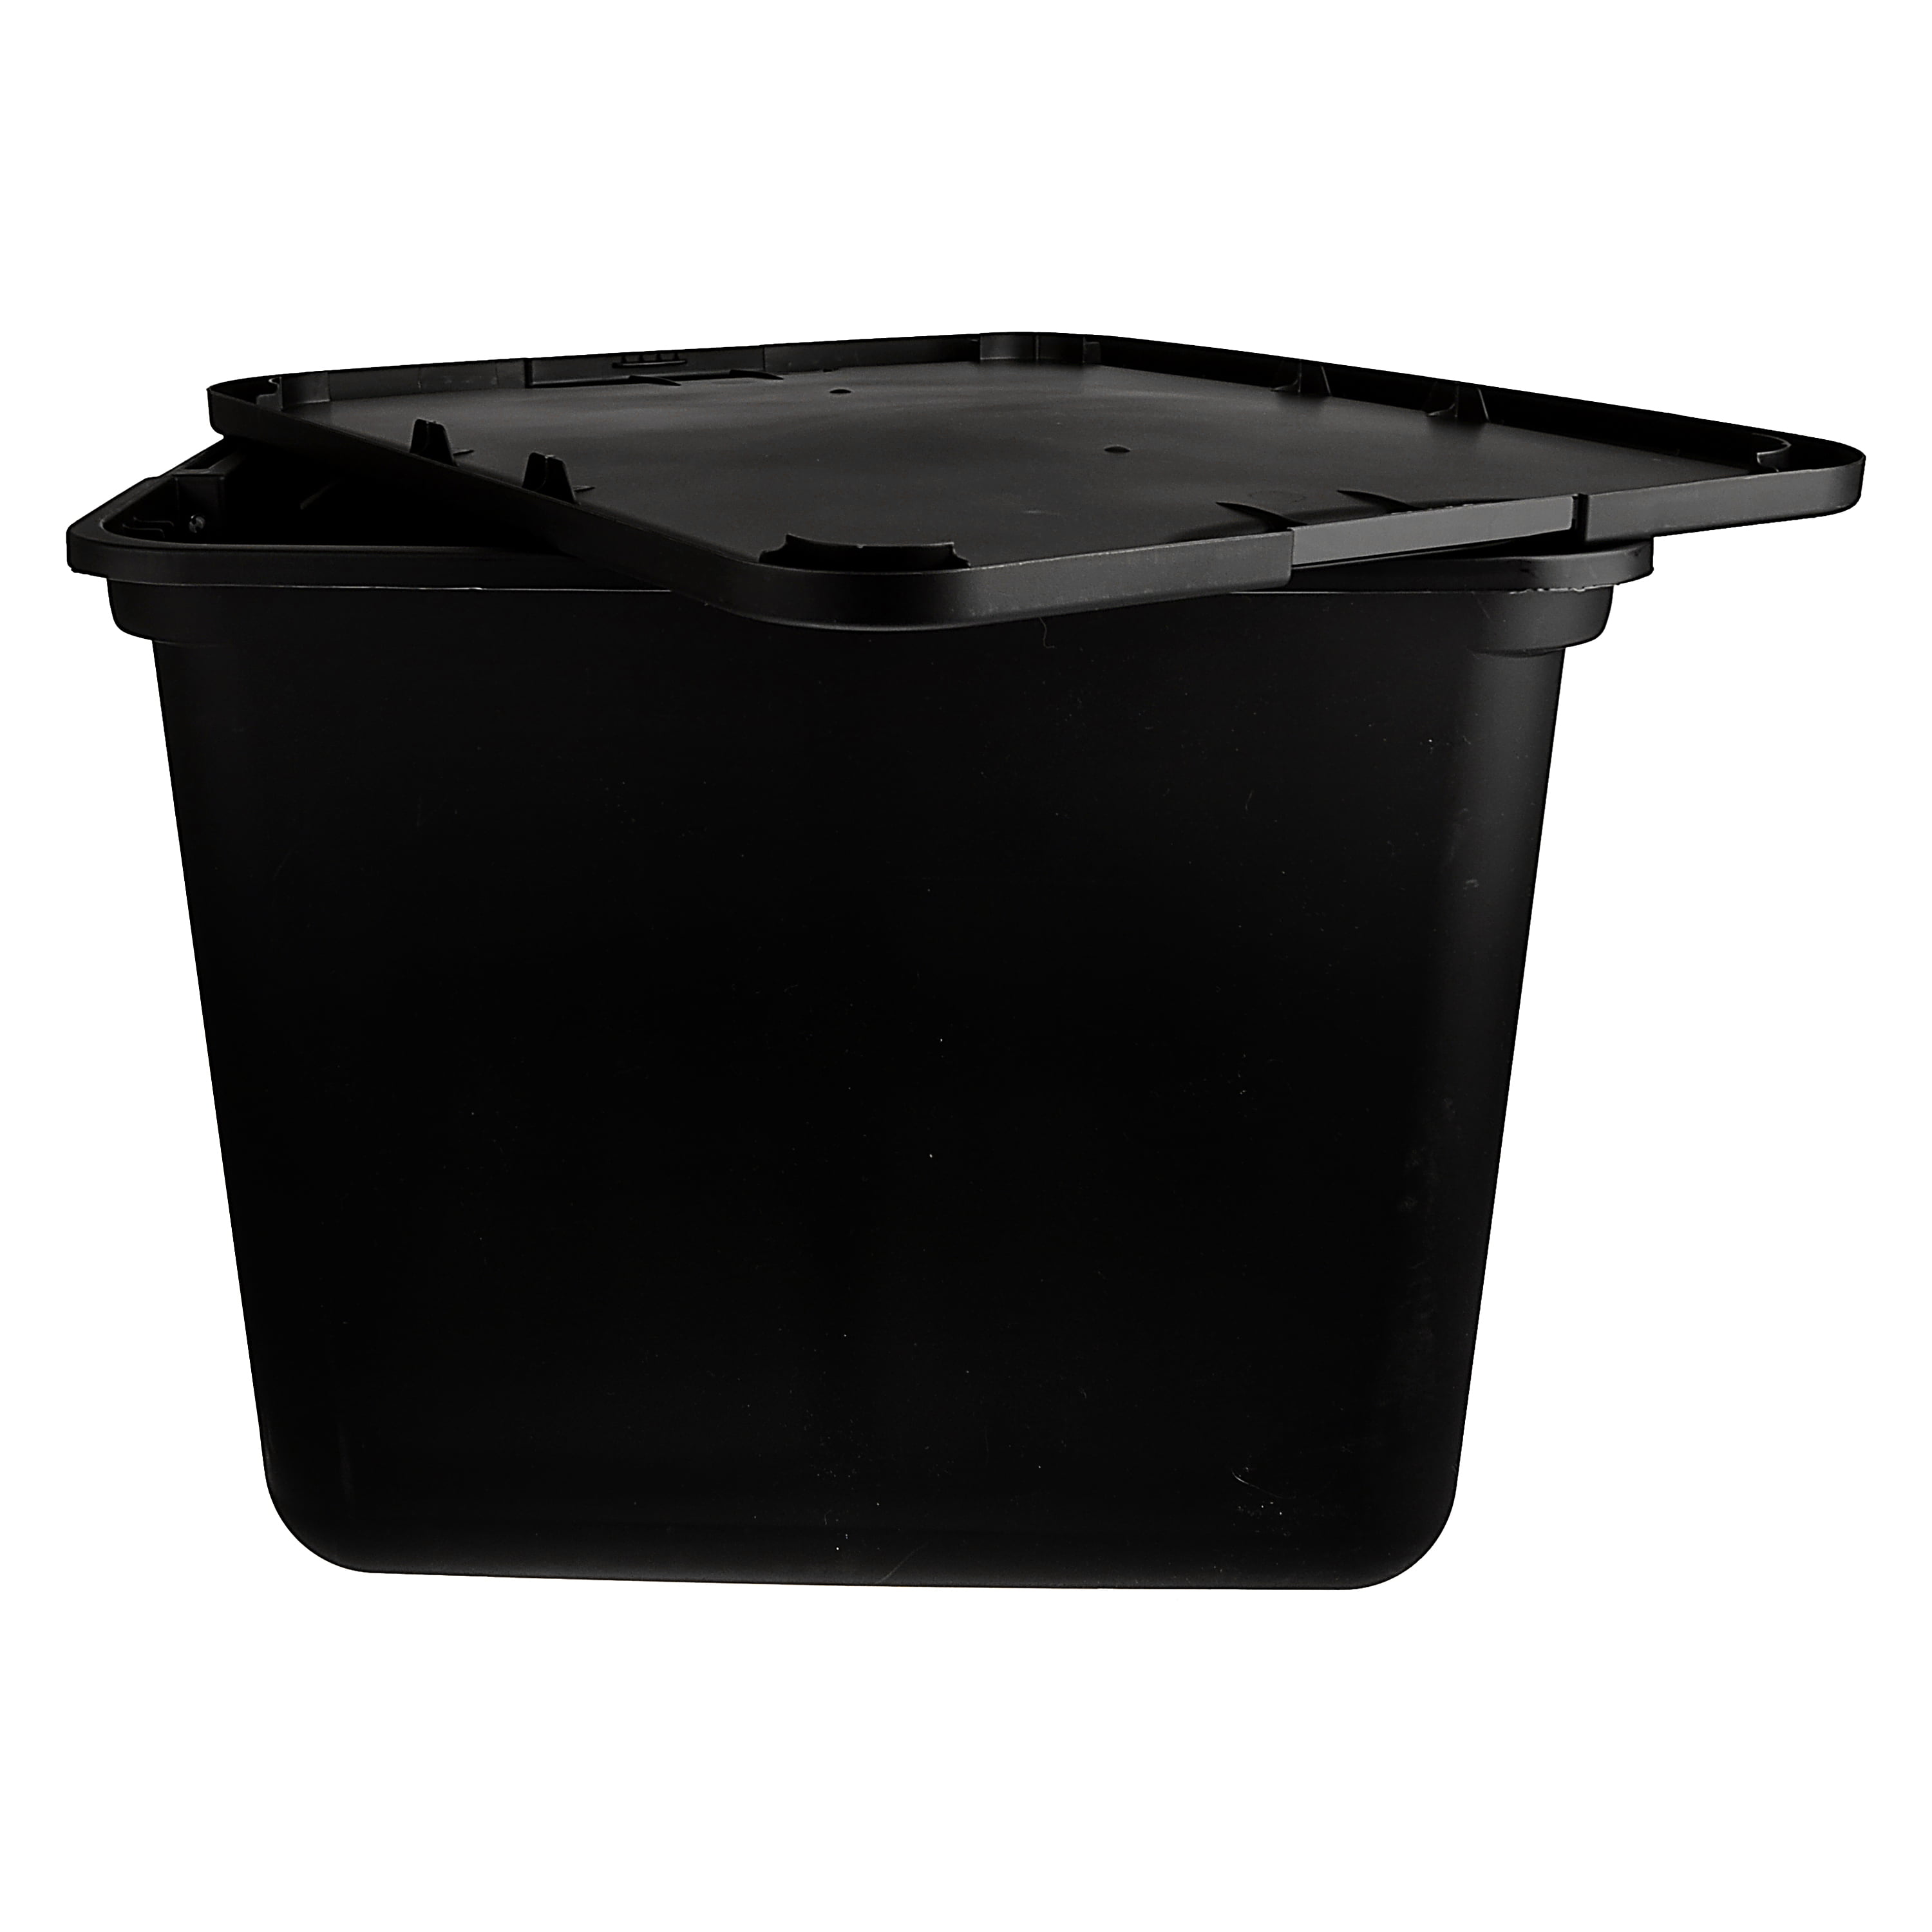 Two Large 20 Gallon Storage Boxes Clear Plastic Totes Locking Lids 24 x  19